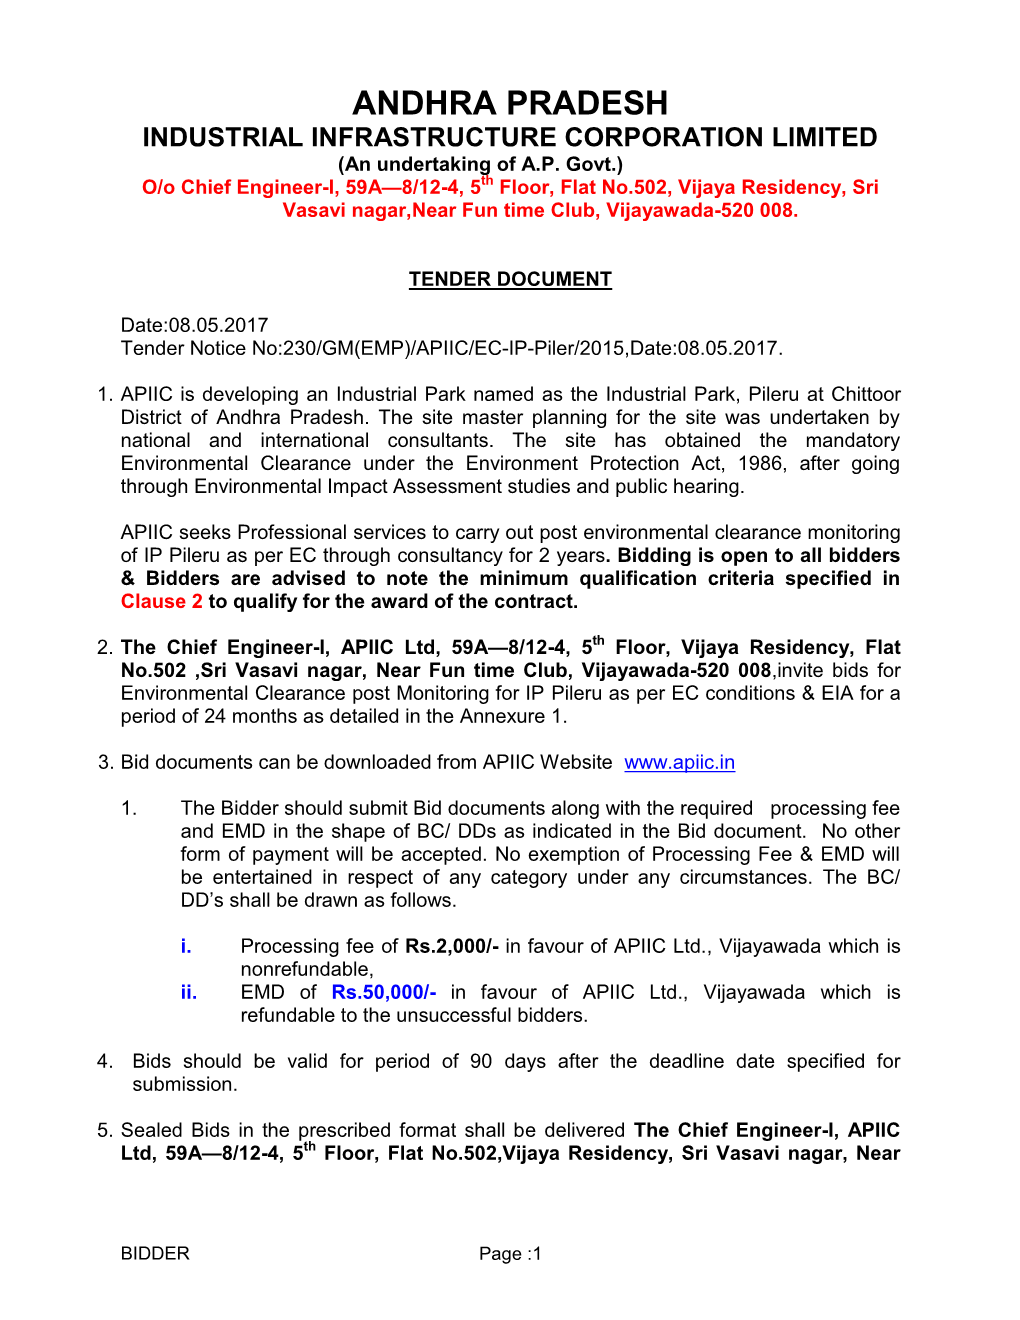 ANDHRA PRADESH INDUSTRIAL INFRASTRUCTURE CORPORATION LIMITED (An Undertaking of A.P